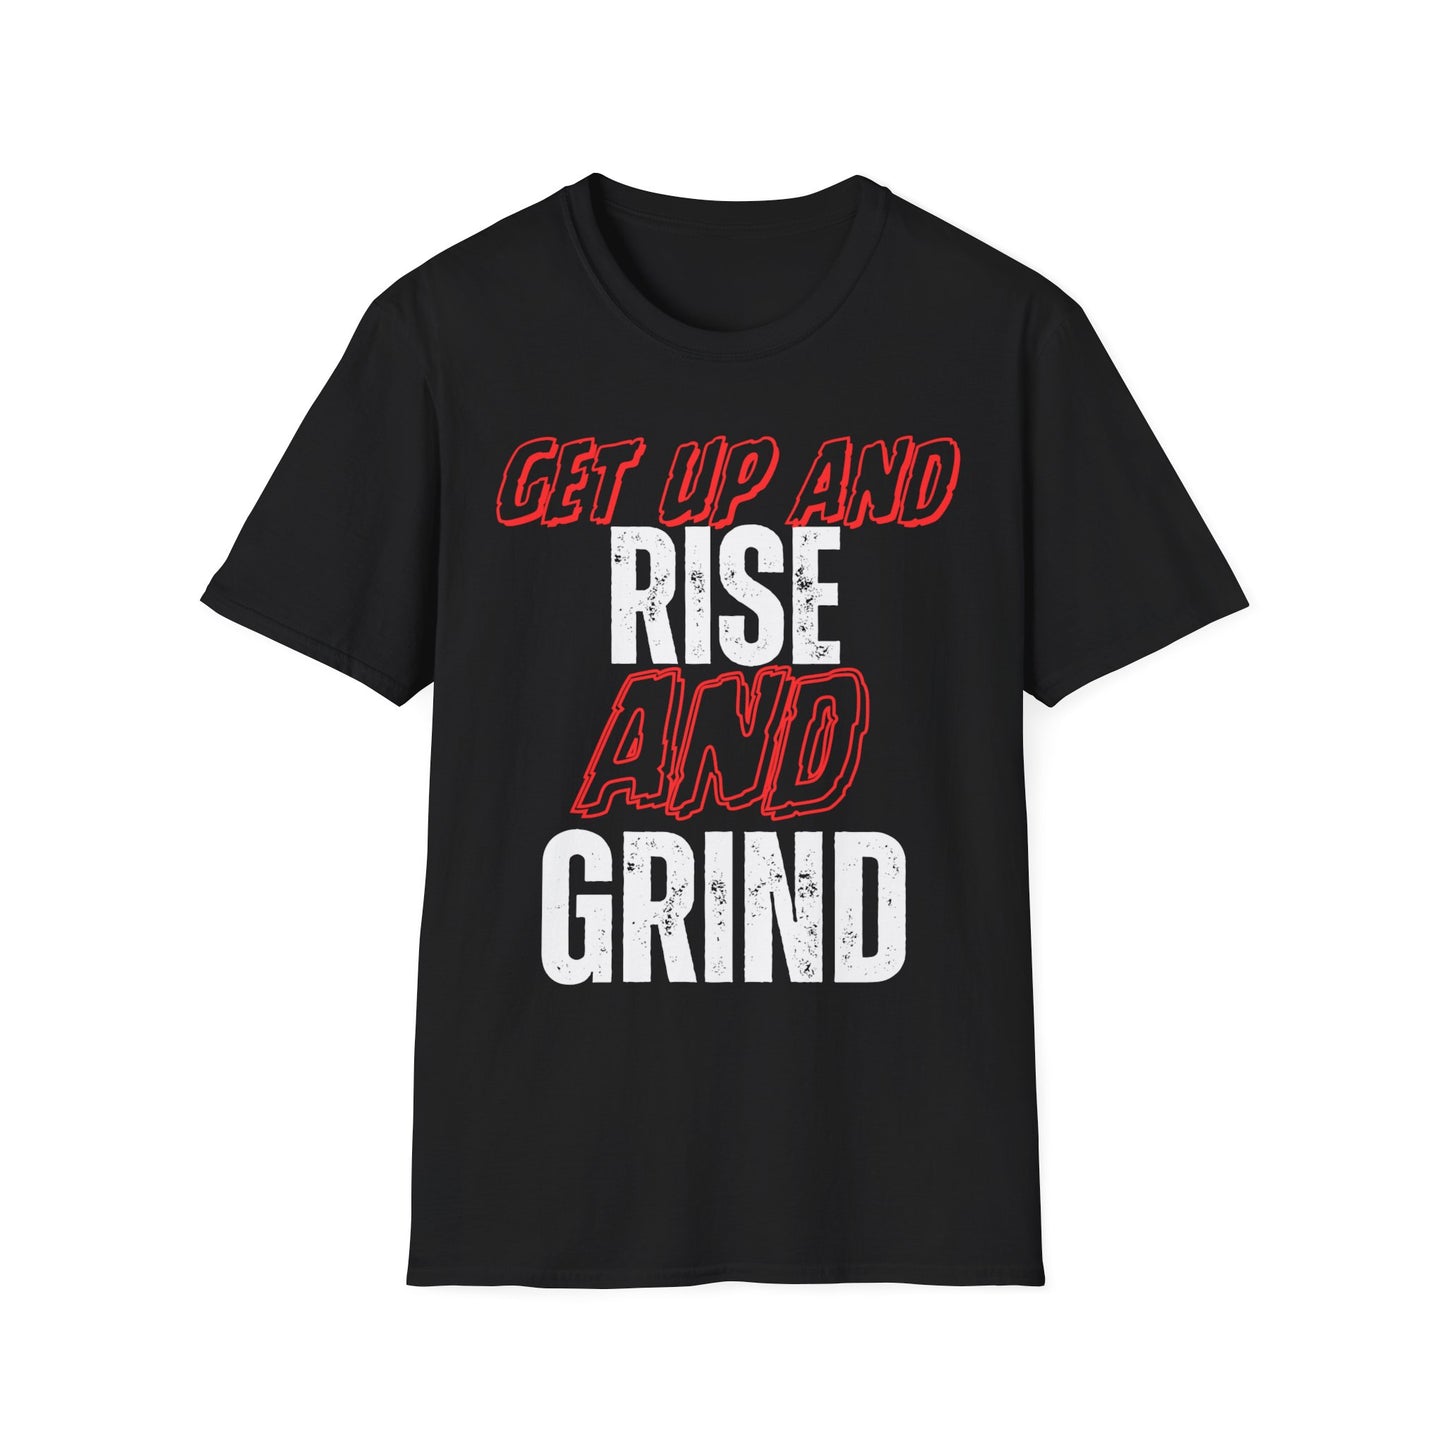 Unisex Softstyle design (RISE AND GRIND) T-Shirt